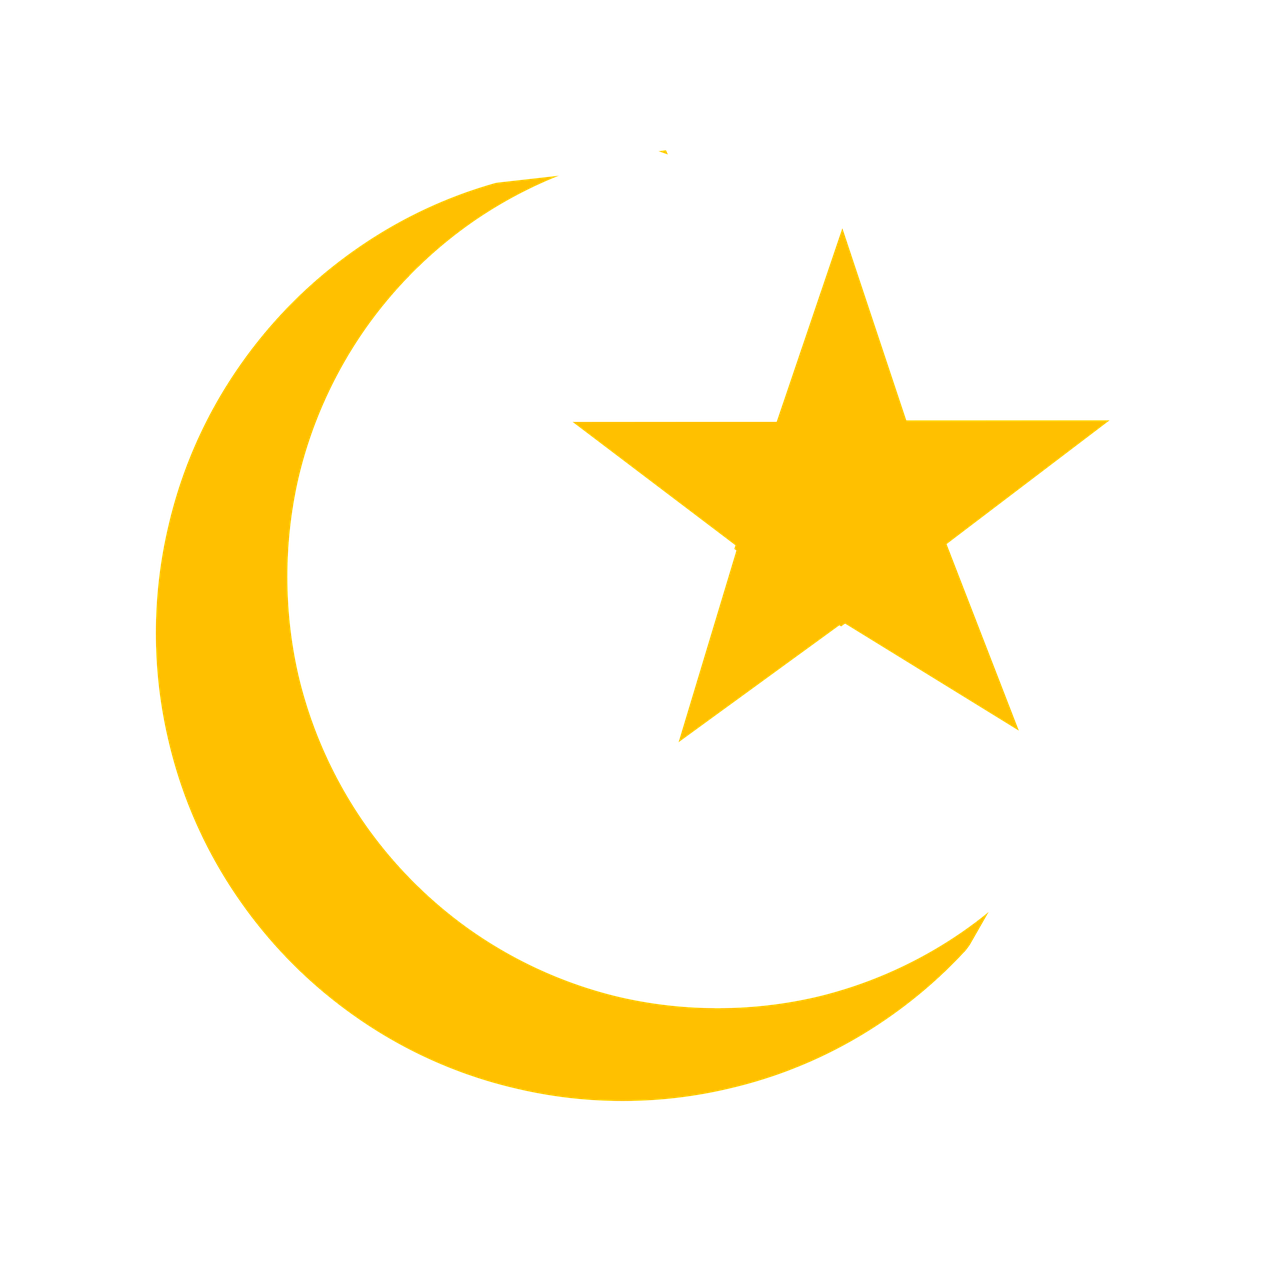 A Yellow Crescent Moon And Star